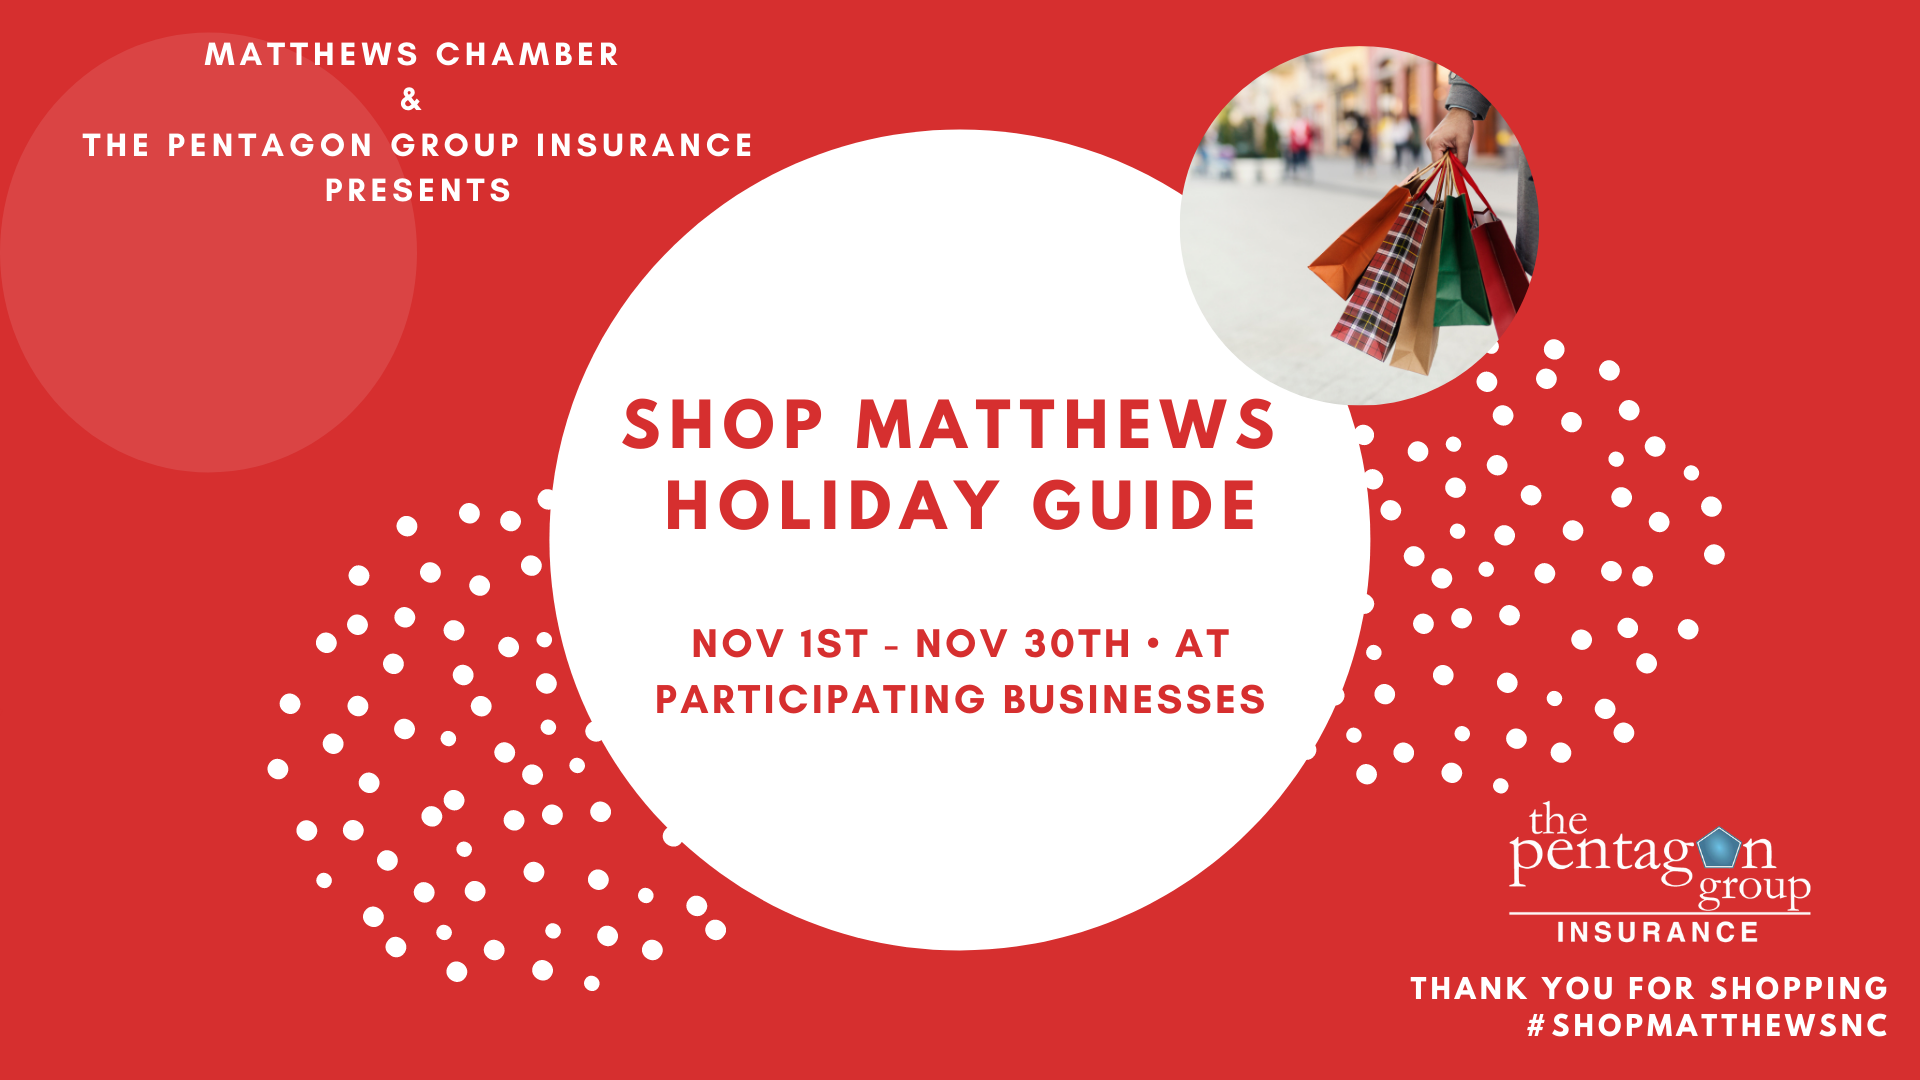 Shop Matthews Holiday Guide-1280 x 520px (Facebook Event Cover)-4